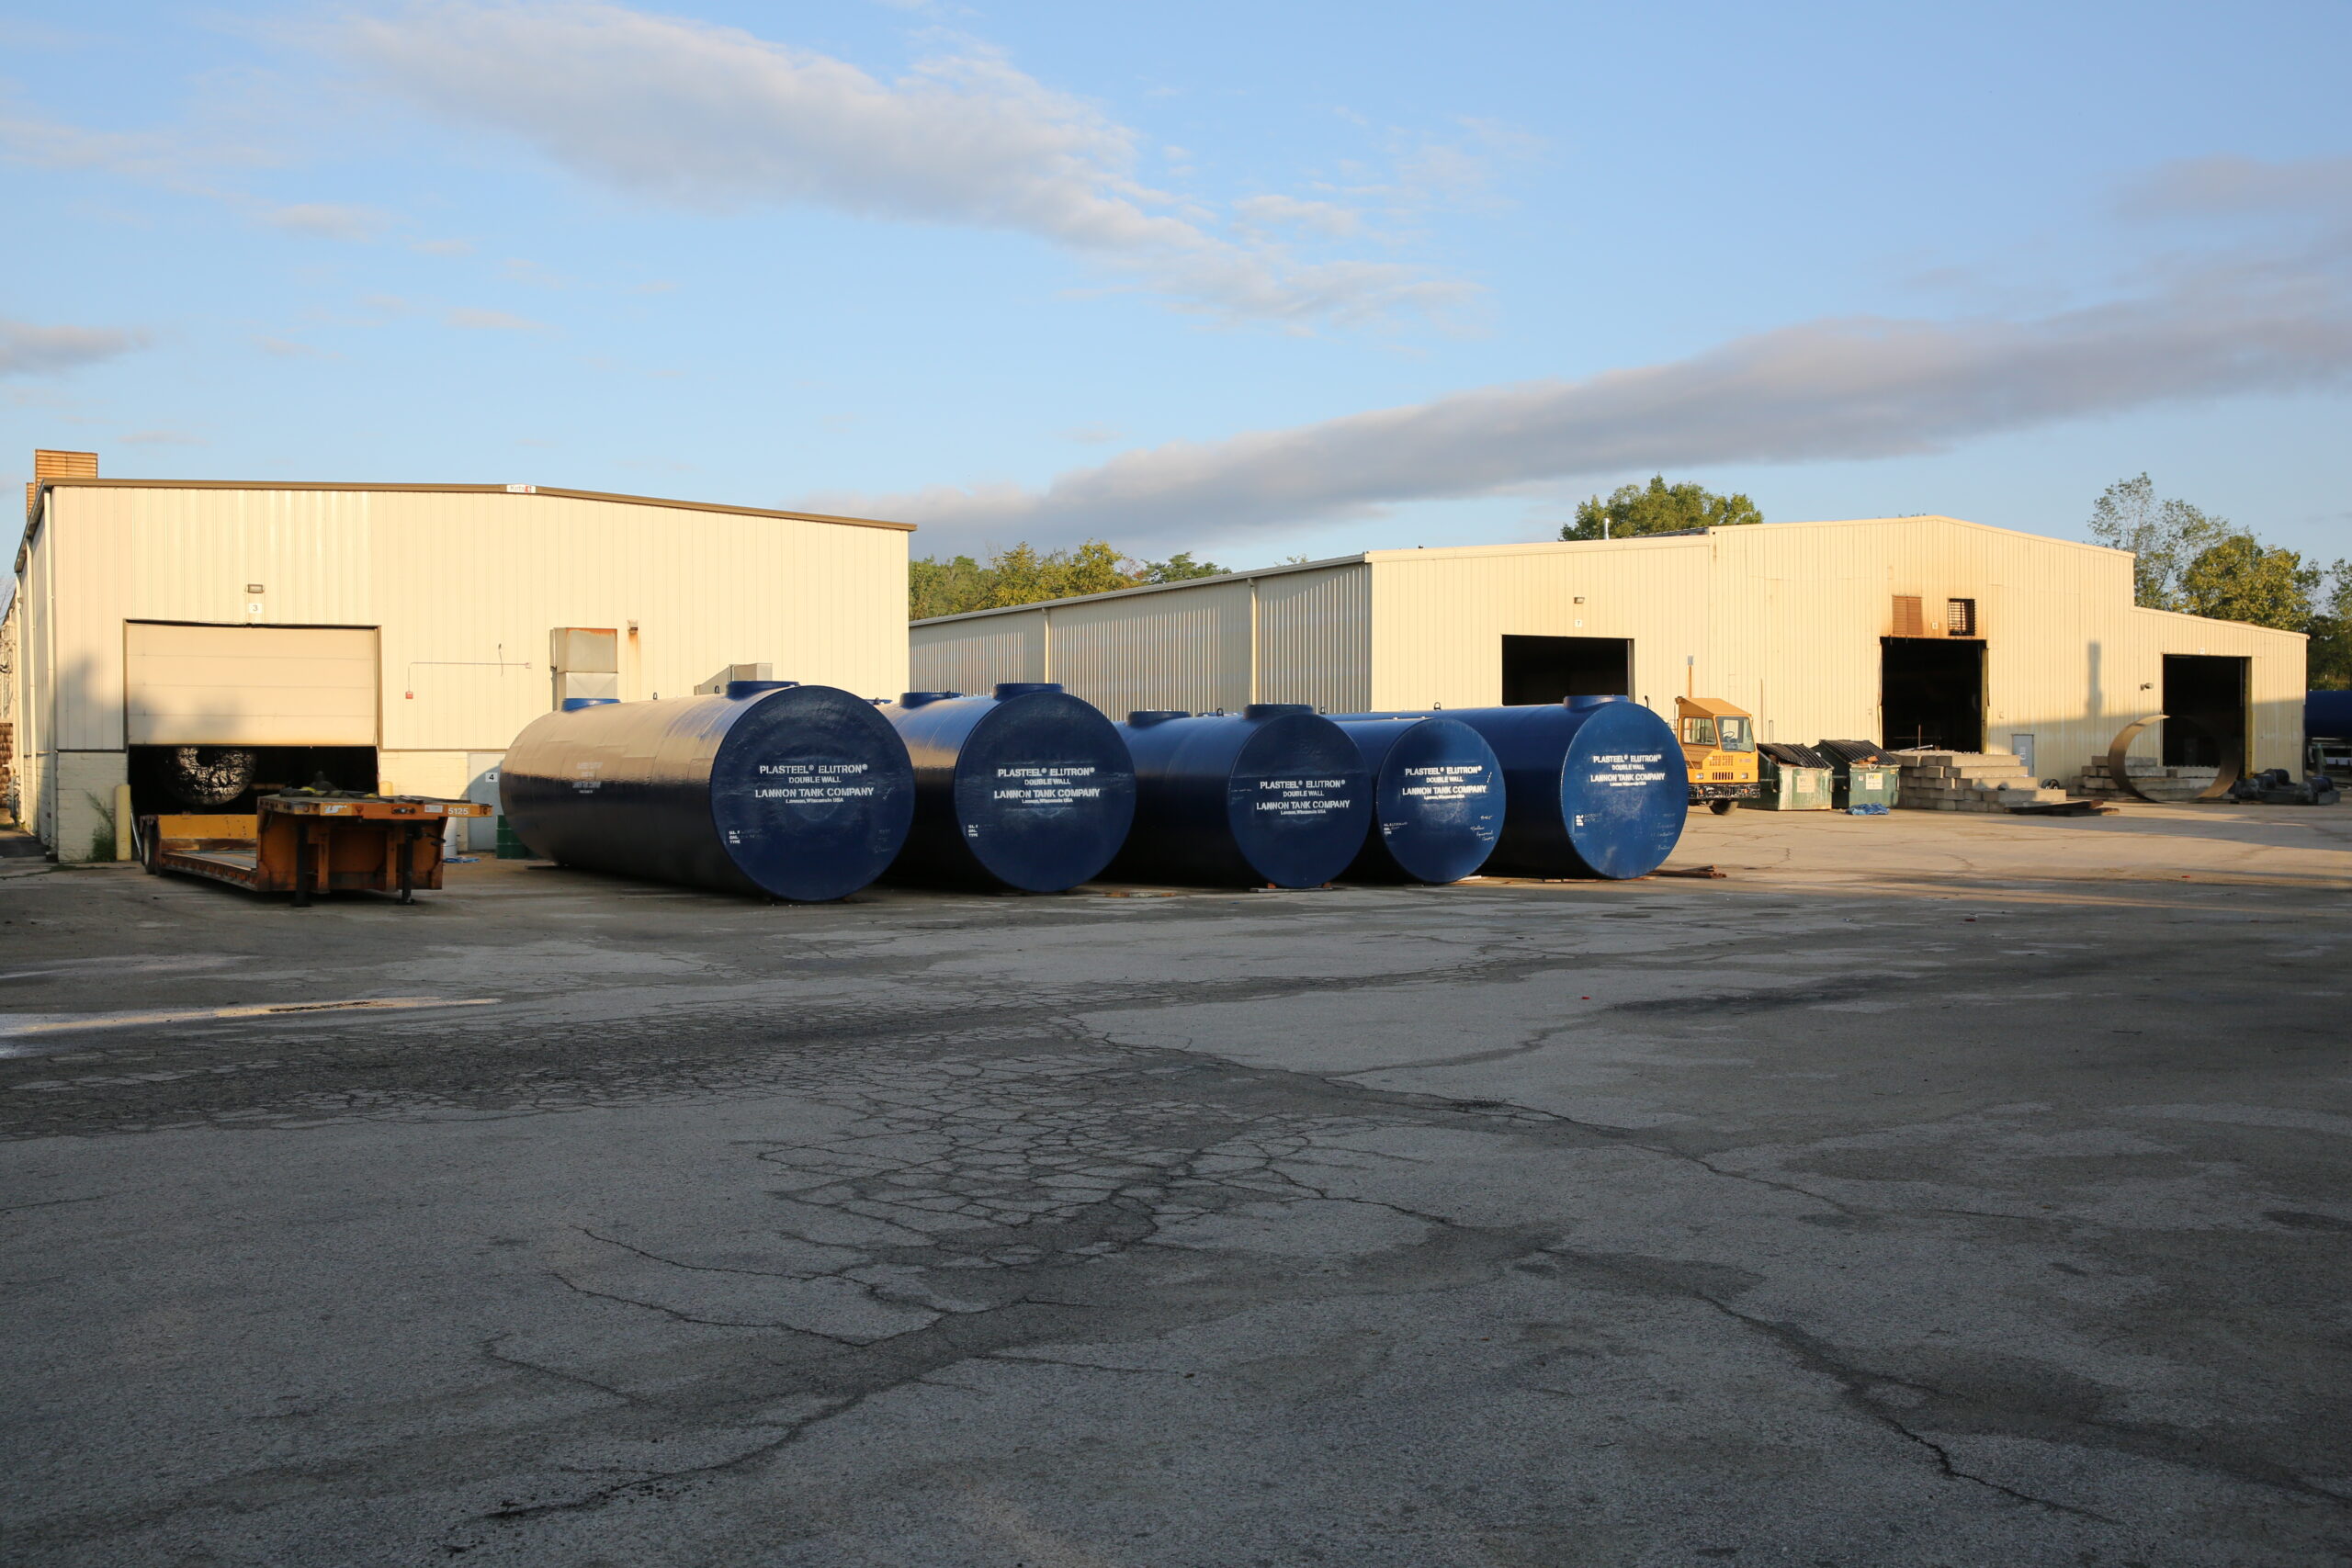 Our large lot is designed to accommodate multiple tanks at once, ensuring that we can meet our customers' needs in a timely and efficient manner.